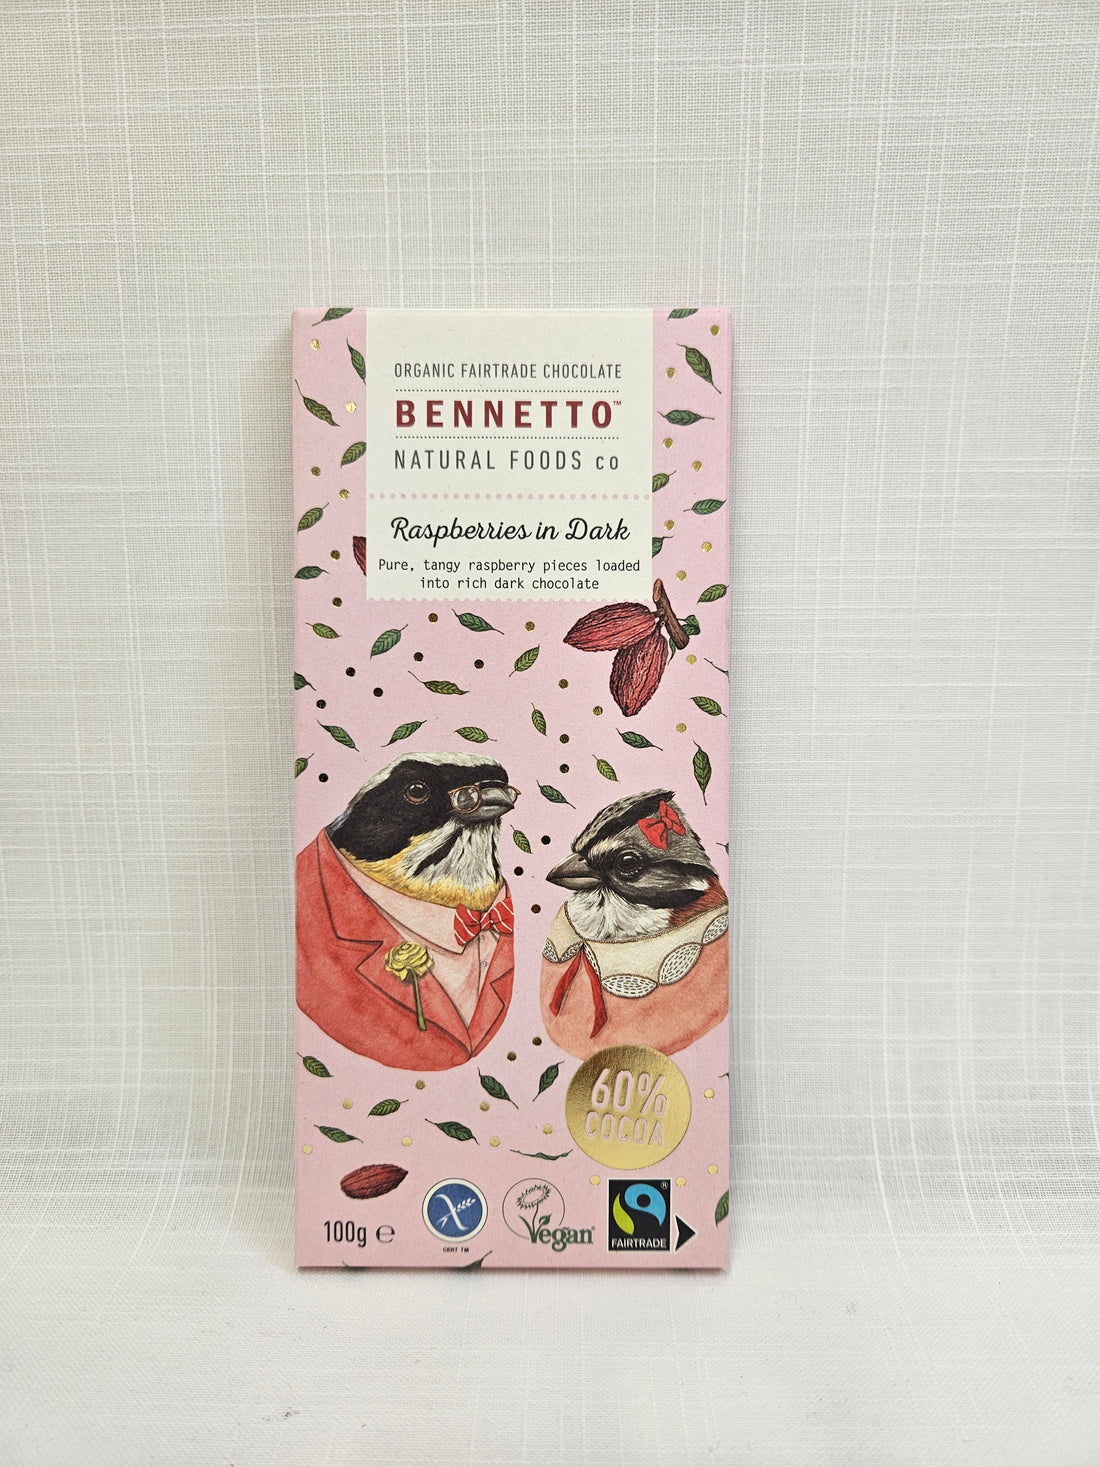 Raspberries in Dark Chocolate bar by Bennetto Natural Foods Co.